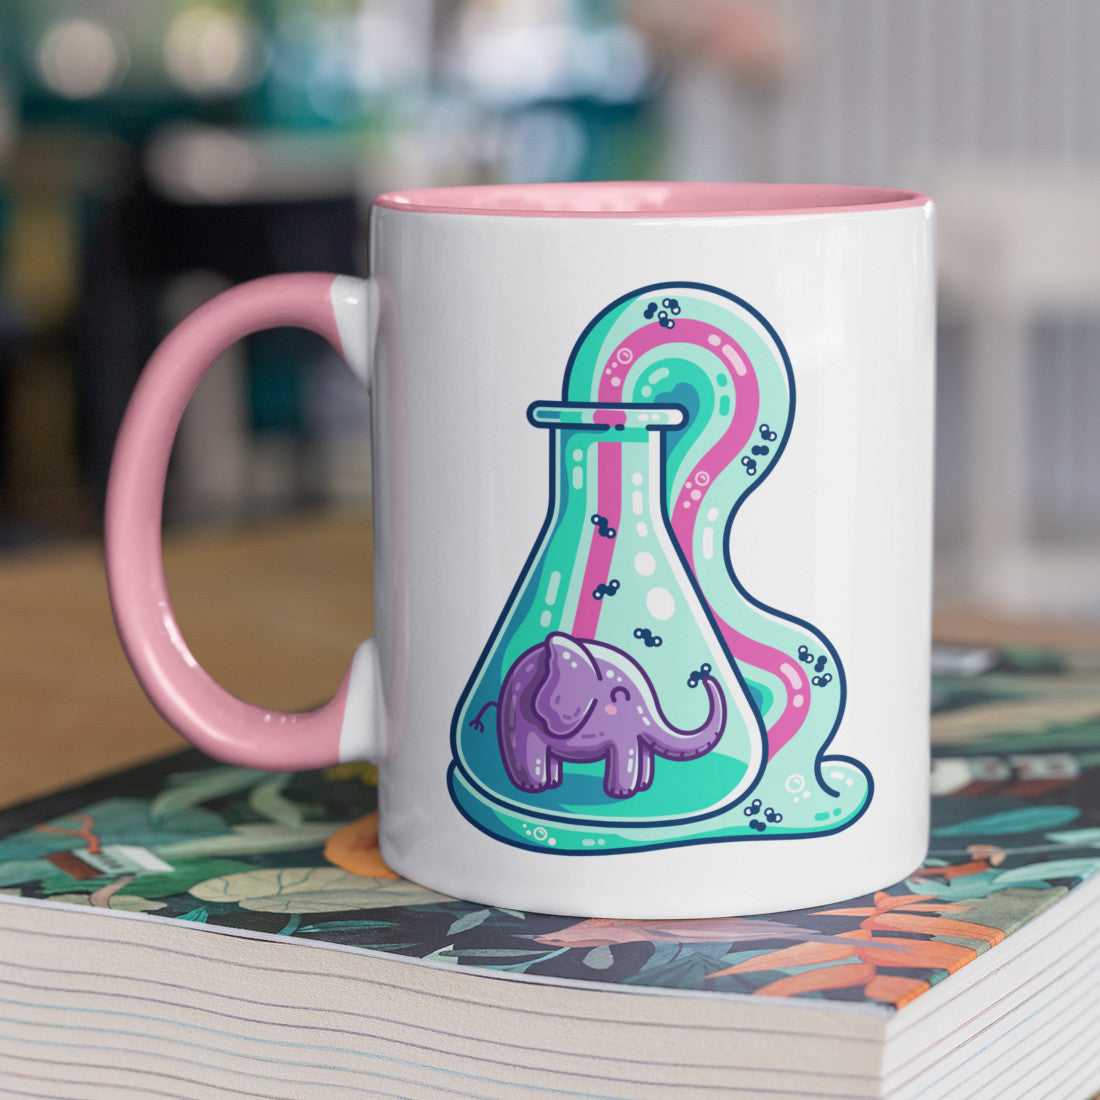 A two toned white and pale pink ceramic mug with the handle to the right showing a design of a conicle flask with a purple elephant inside and green foam coming out and down with a pink stripe along the middle of it with small molecules represented in the foam.